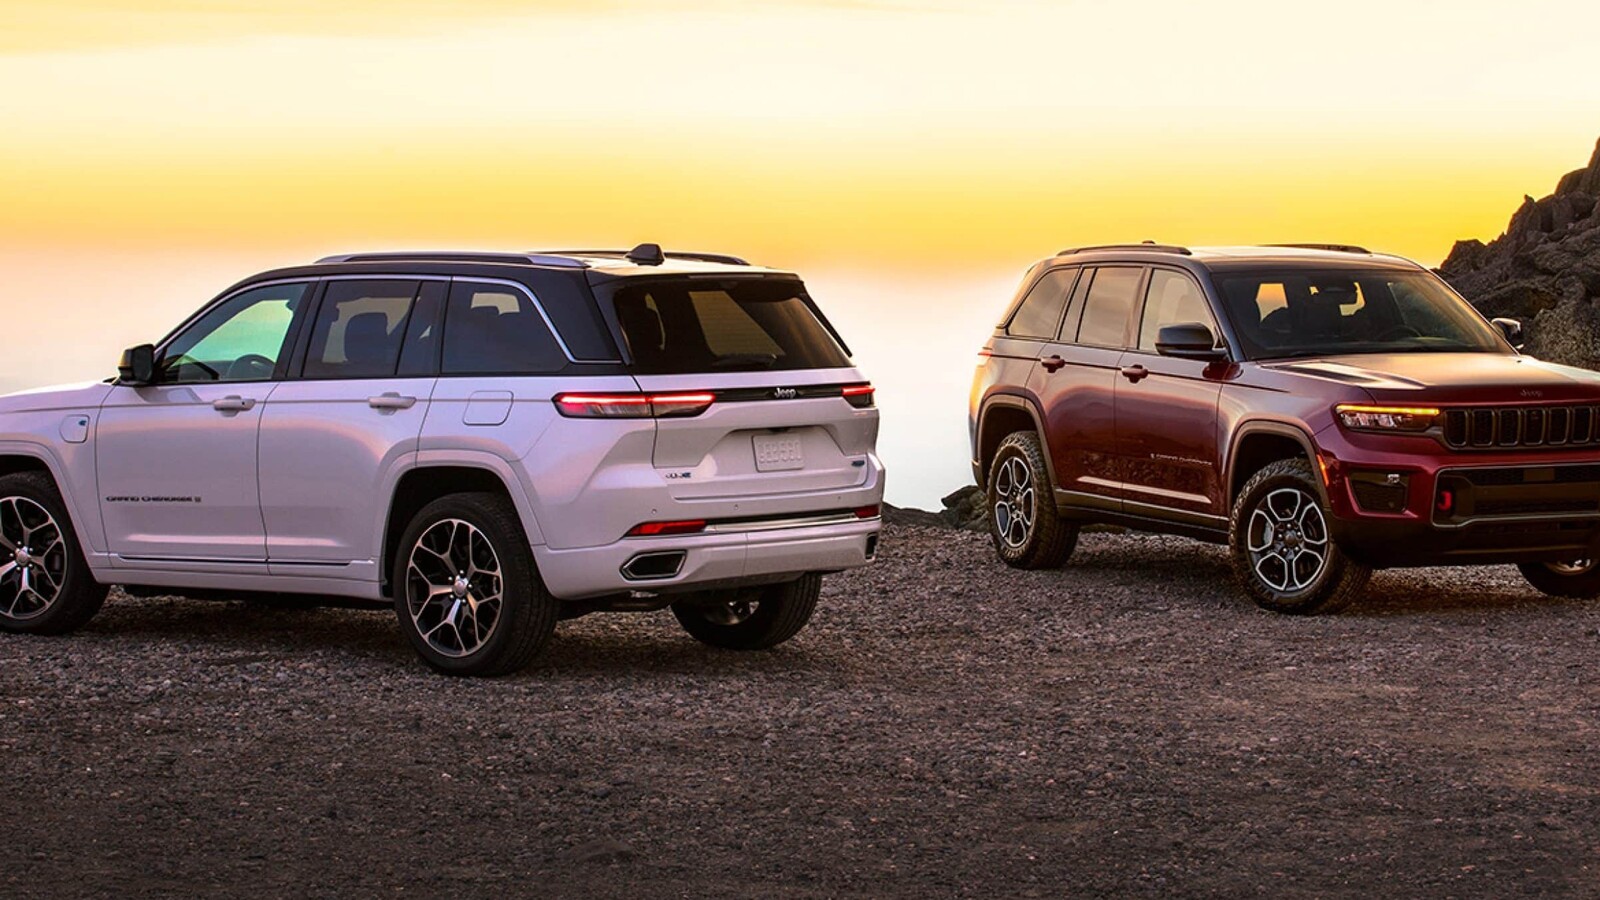 https://static.citylifestyle.com/articles/2023-jeep-grand-cherokee-4xe/2022-All-New-Grand-Cherokee-Gallery-Exterior-Lineup-Summit-Reserve-and-Trailhawk-4xe-Desktopjpgimage2880-1600.jpg?v=1